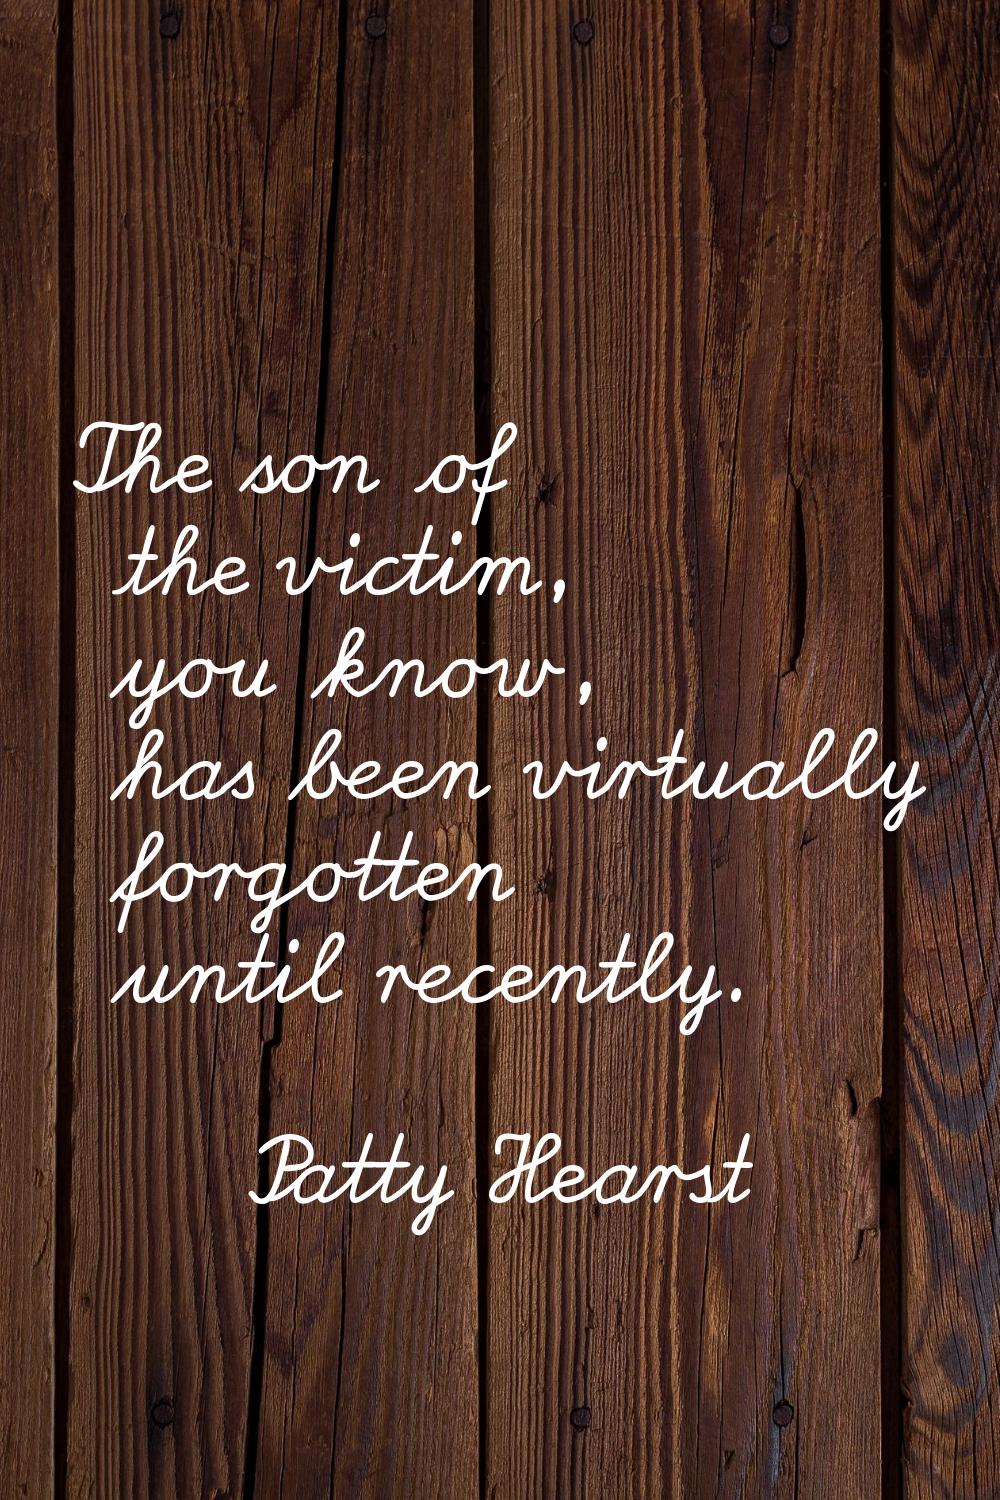 The son of the victim, you know, has been virtually forgotten until recently.